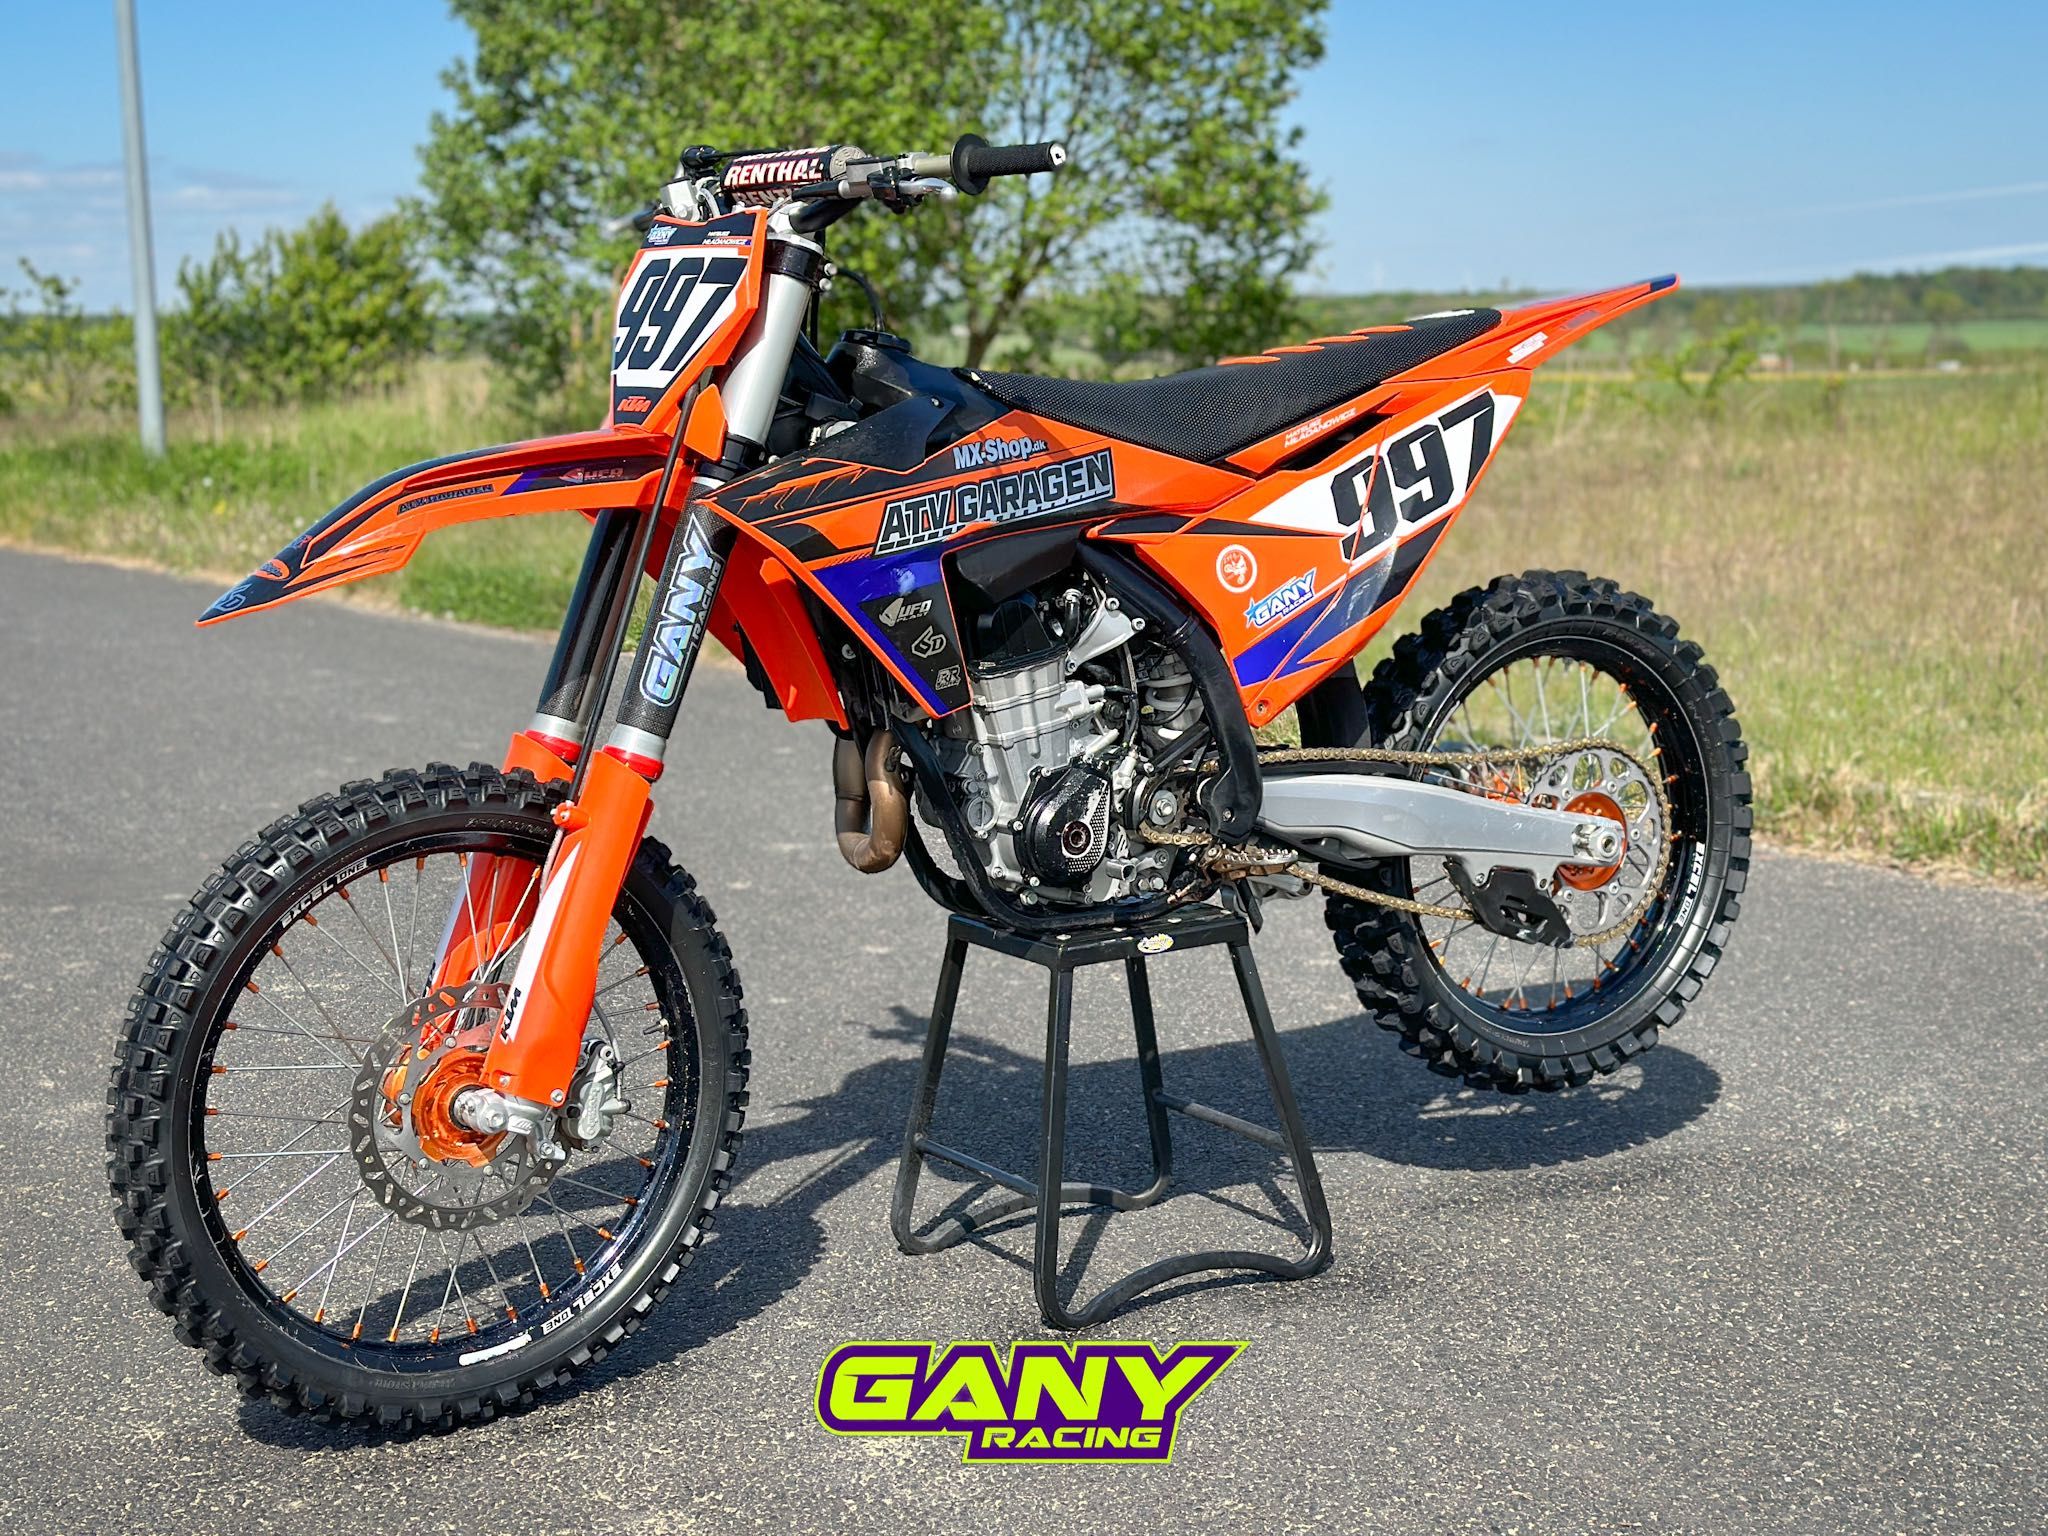 KTM SXF 450 cc 2023 - Nowy Model - Quick Shifter - 50 mth